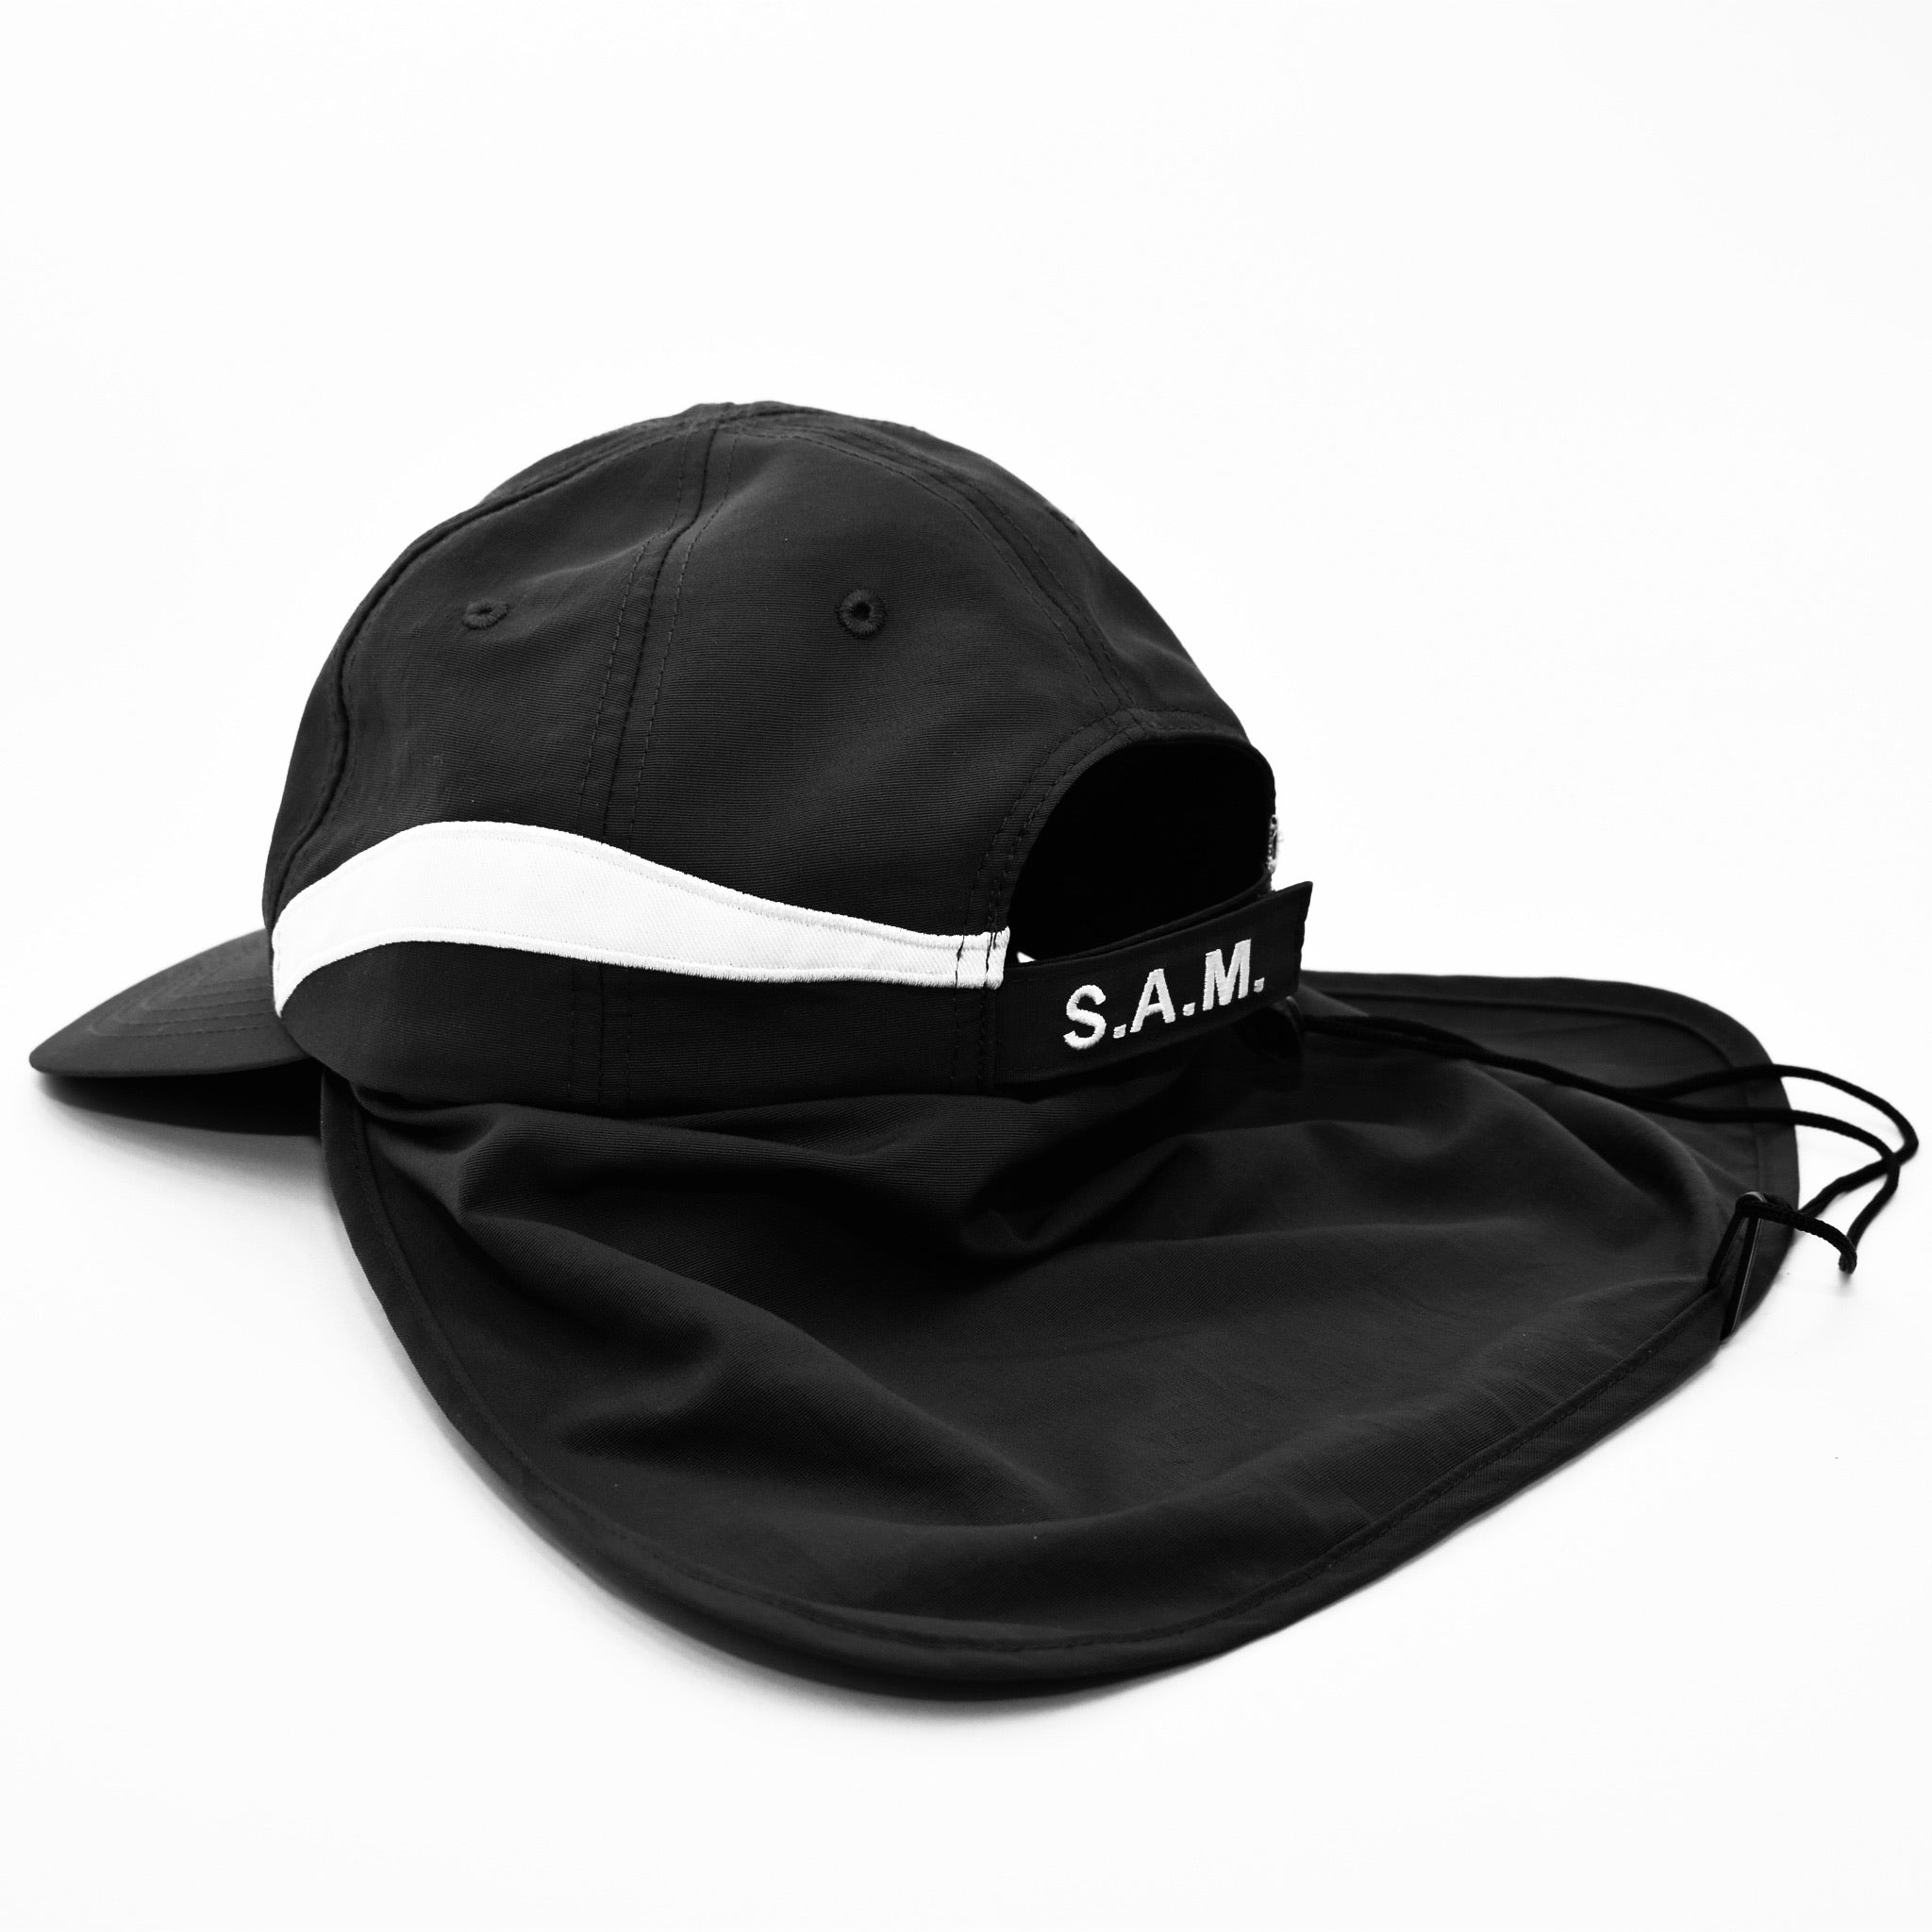 Supreme Hat / Suns Out Shade Wear